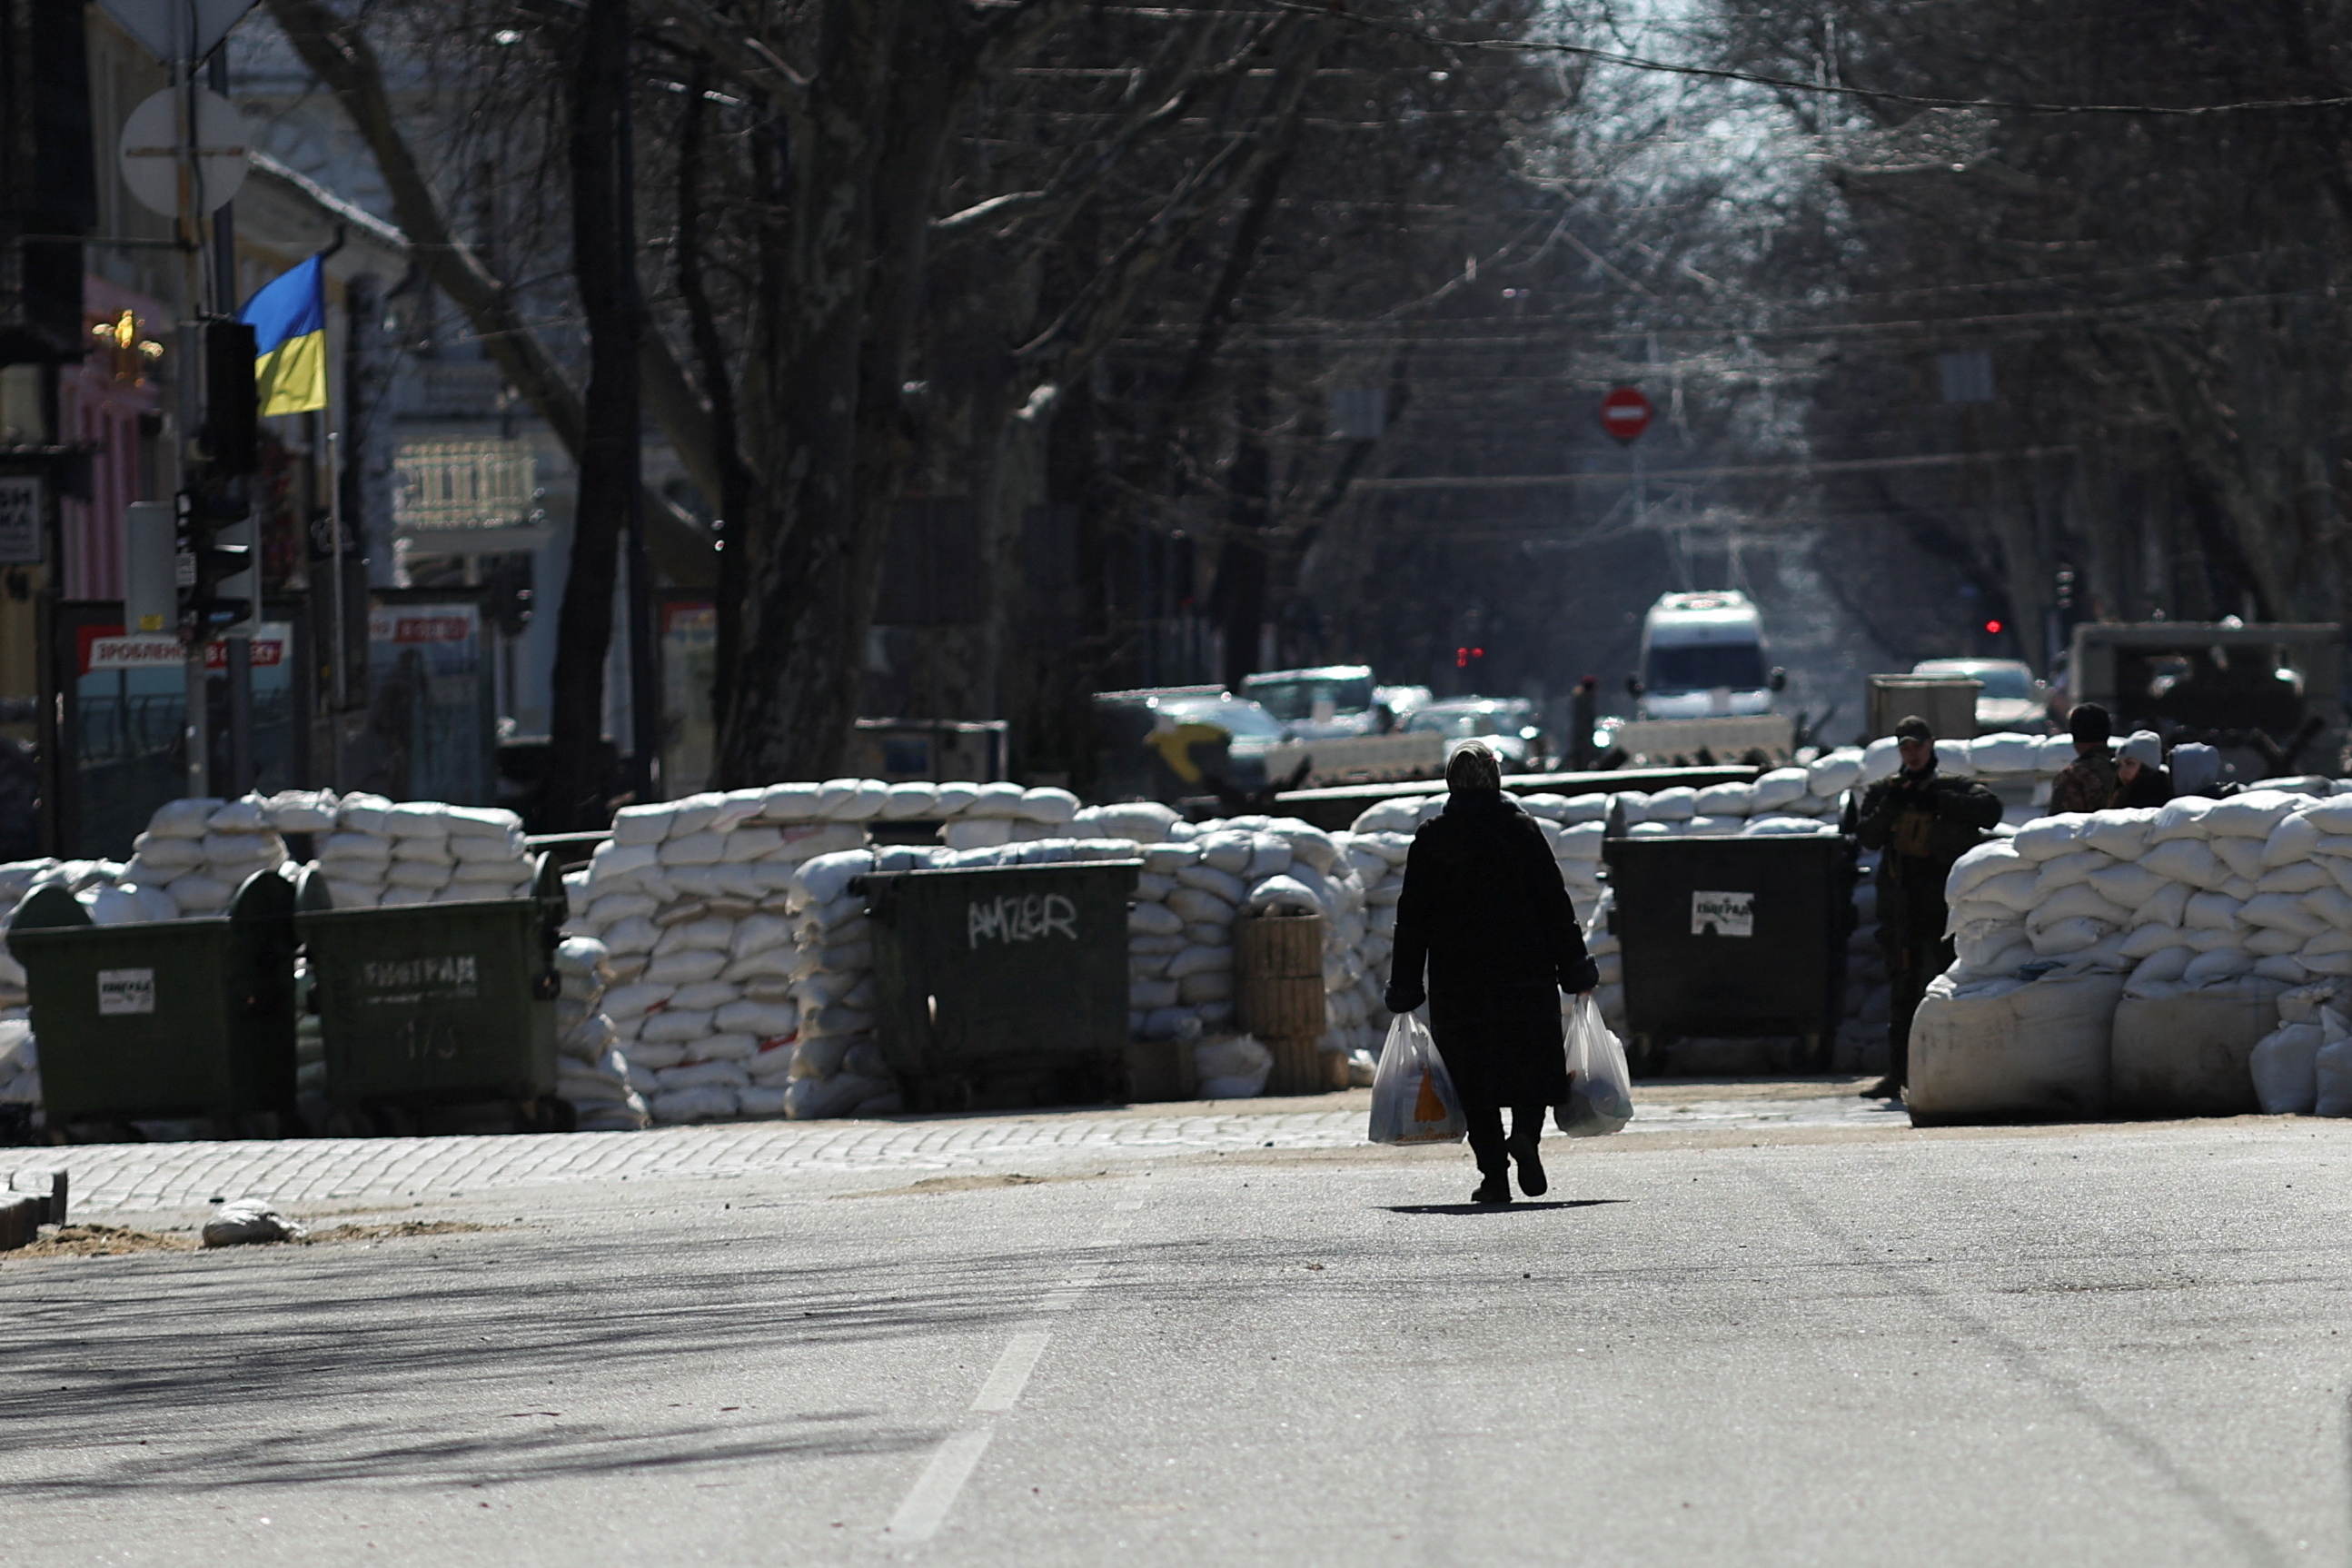 An elderly woman walks near barriers placed on a street, as Russia's invasion of Ukraine continues, in downtown Odessa, Ukraine, March 17, 2022. REUTERS/Nacho Doce